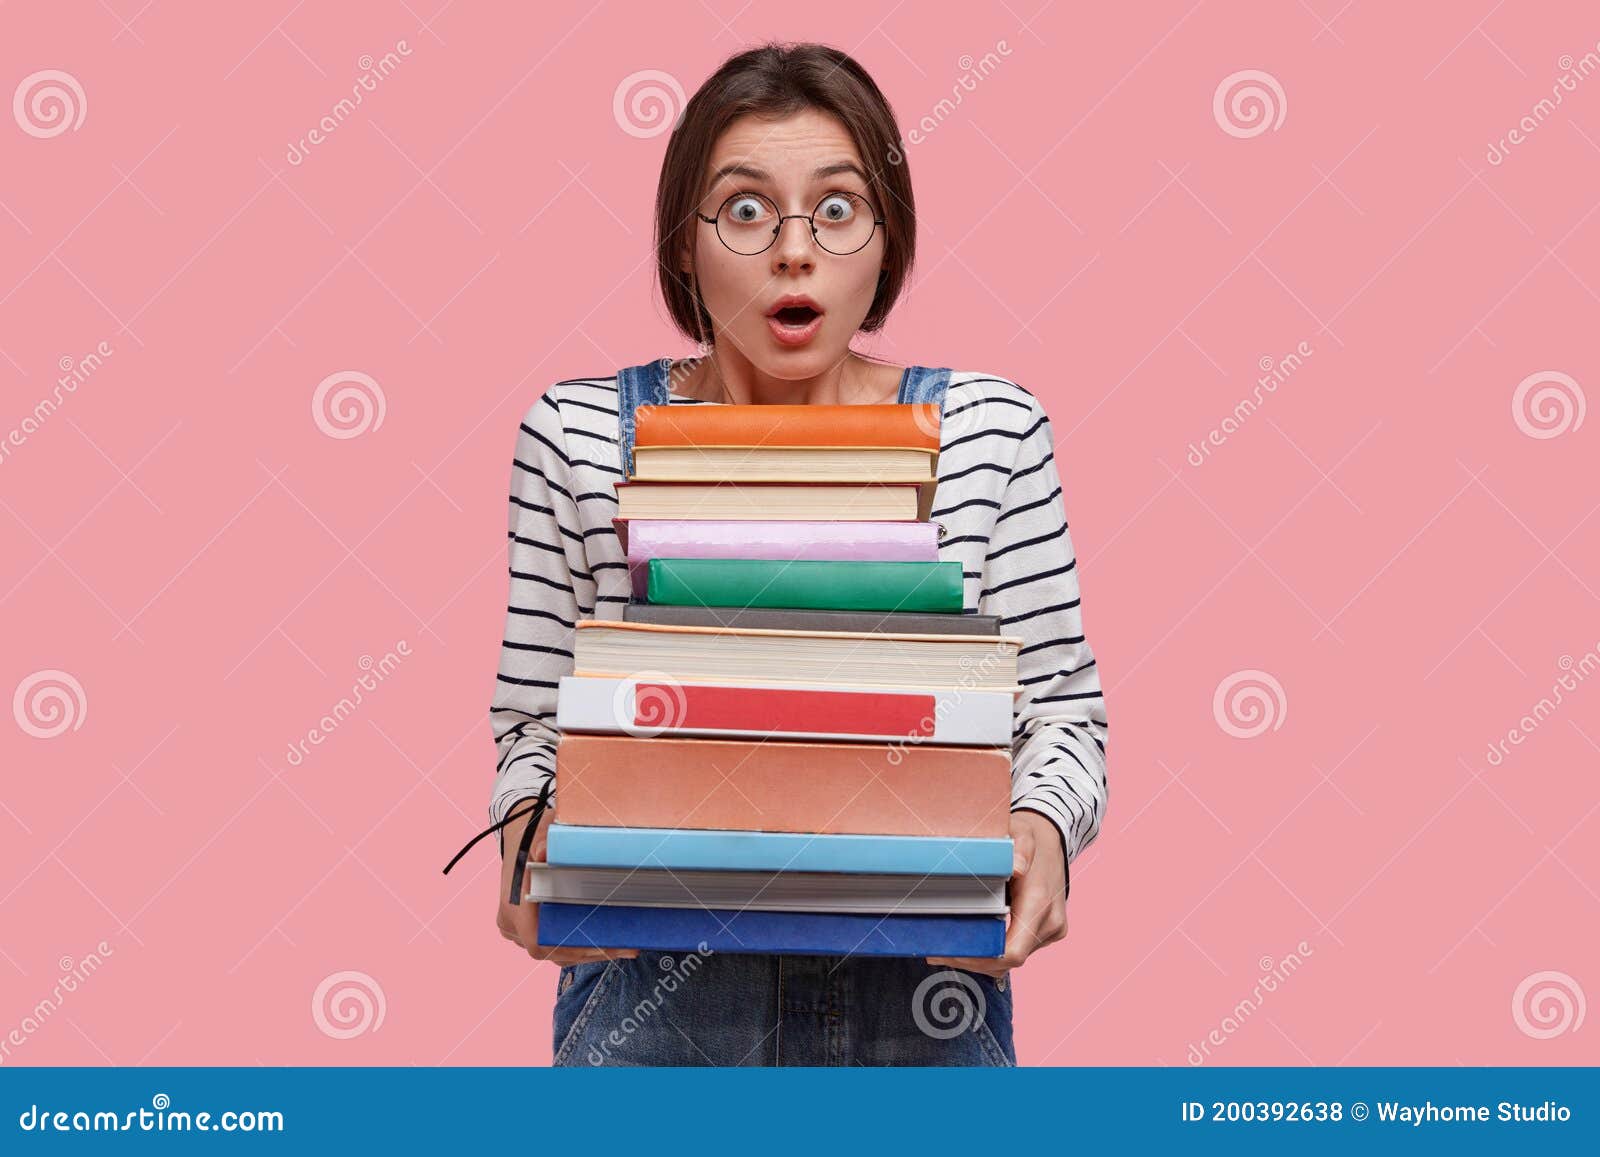 astounded young european woman with dark hair, dressed in striped clothes, carries many books, being stupefied to learn